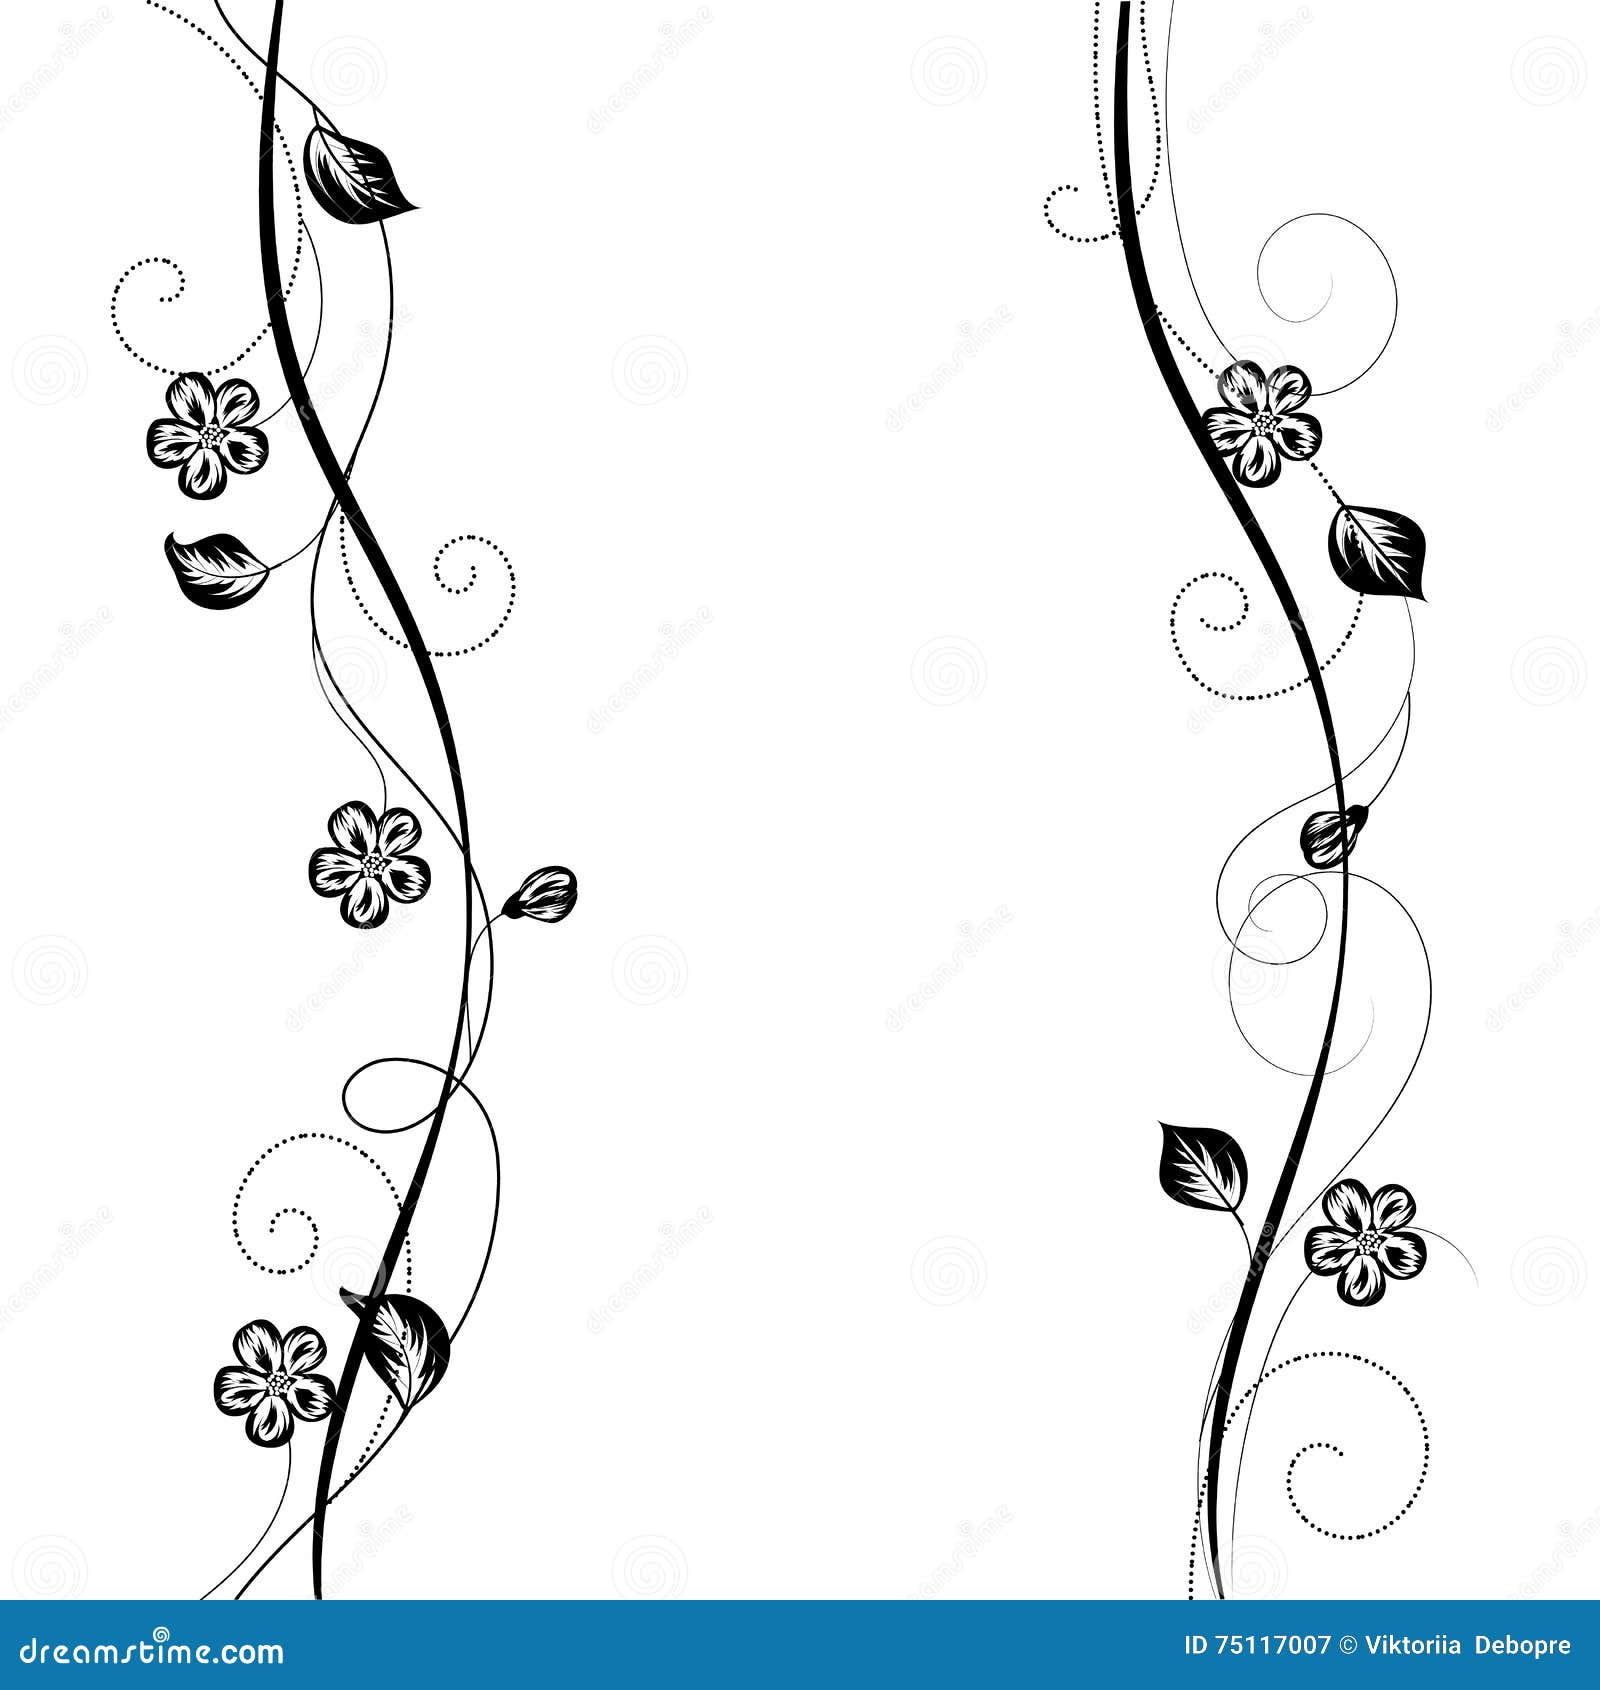 Simple Background Design Black And White : Find, edit, & download ...